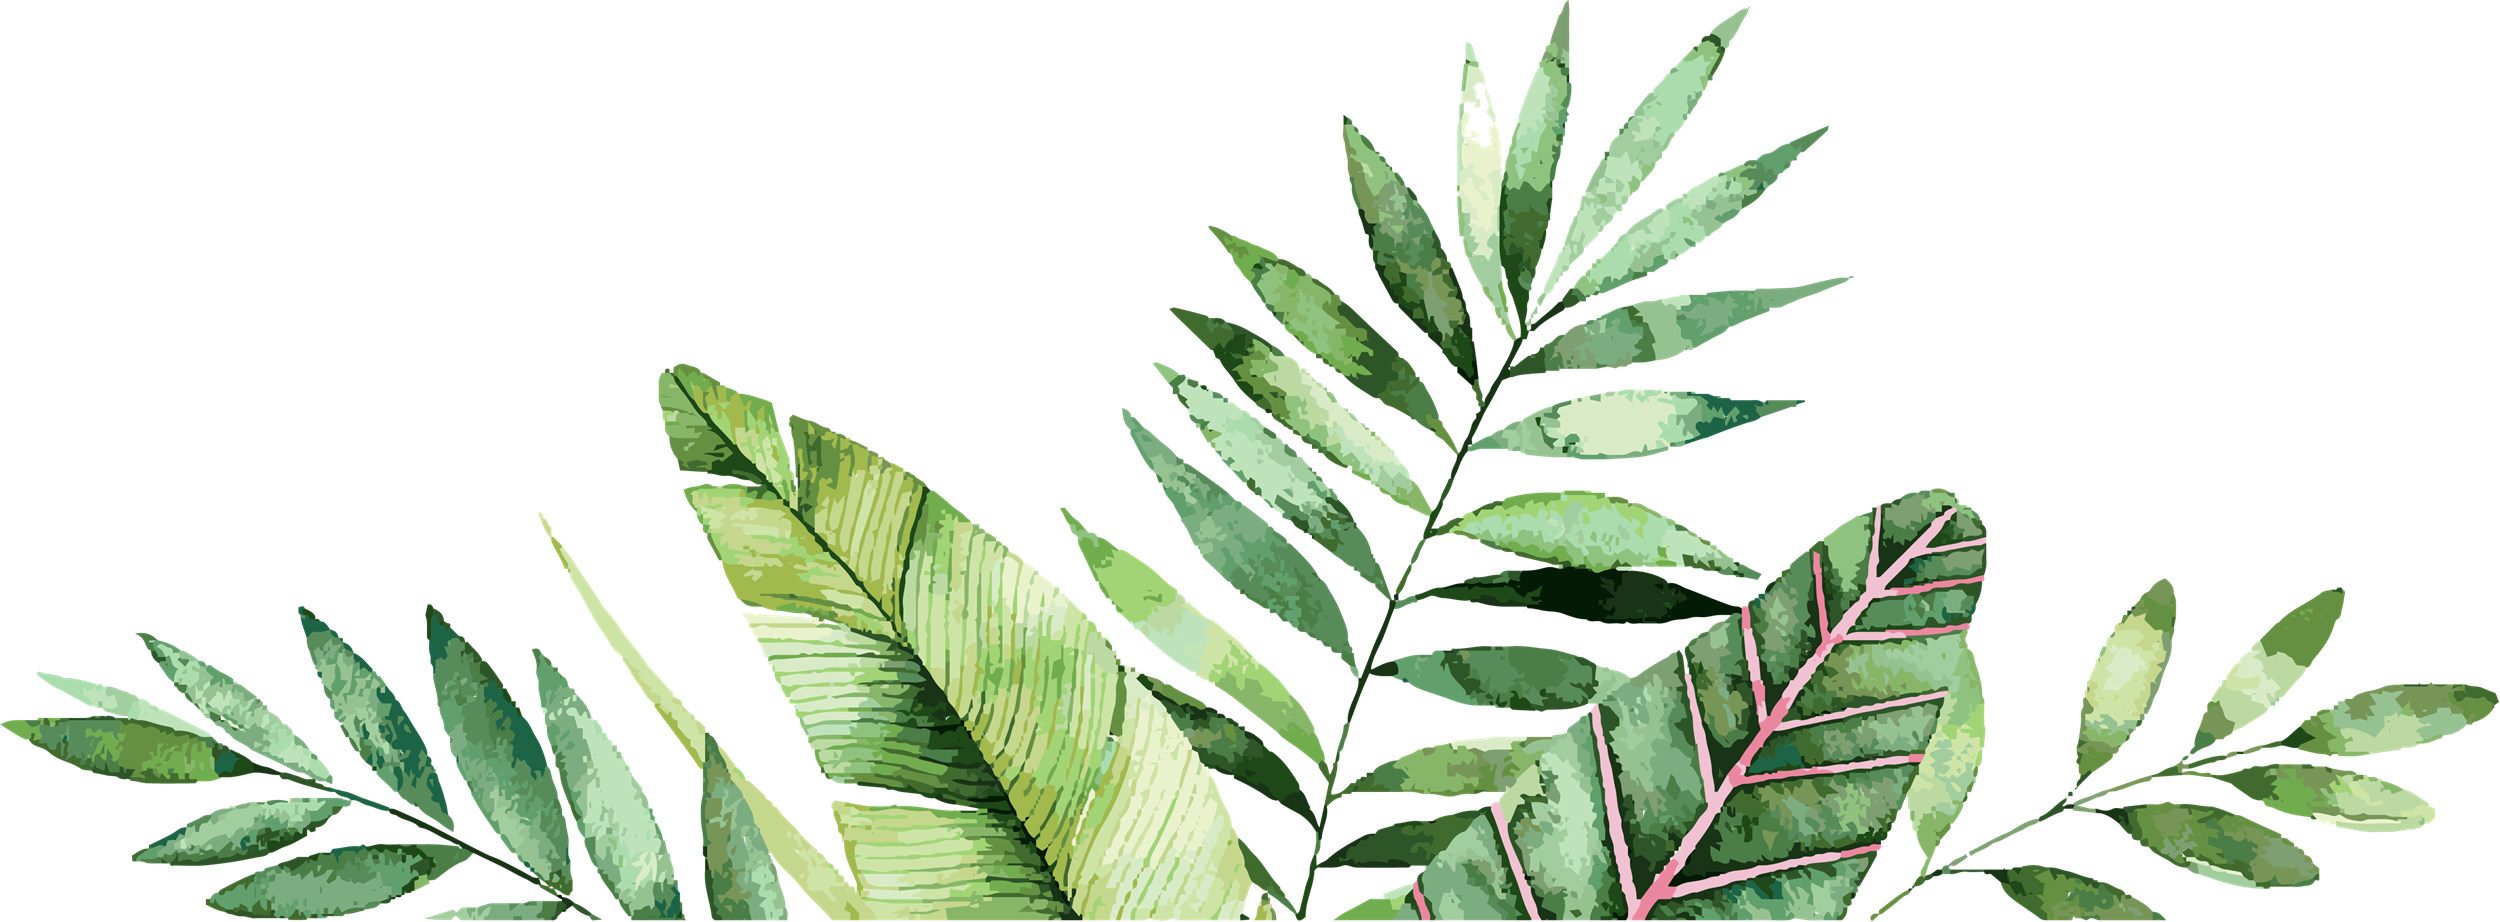 palm leaves graphic